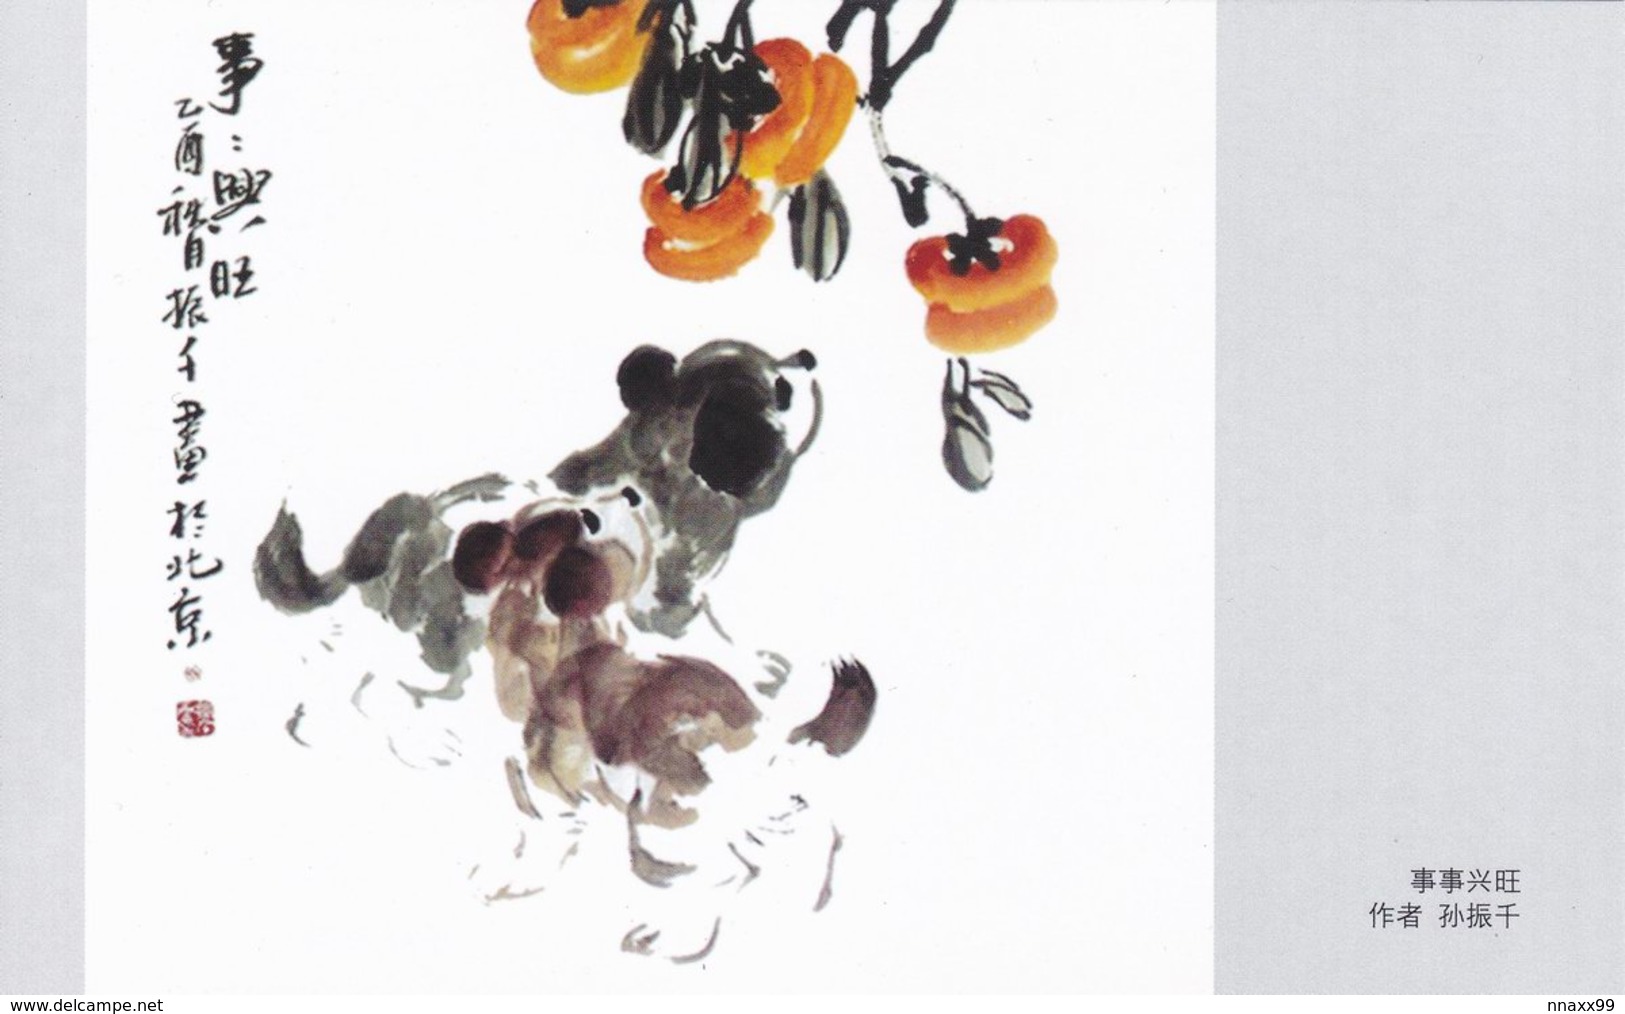 Art - Puppys With Persimmon, Chinese Painting Of SUN Zhenqian's Dog Series - Dogs